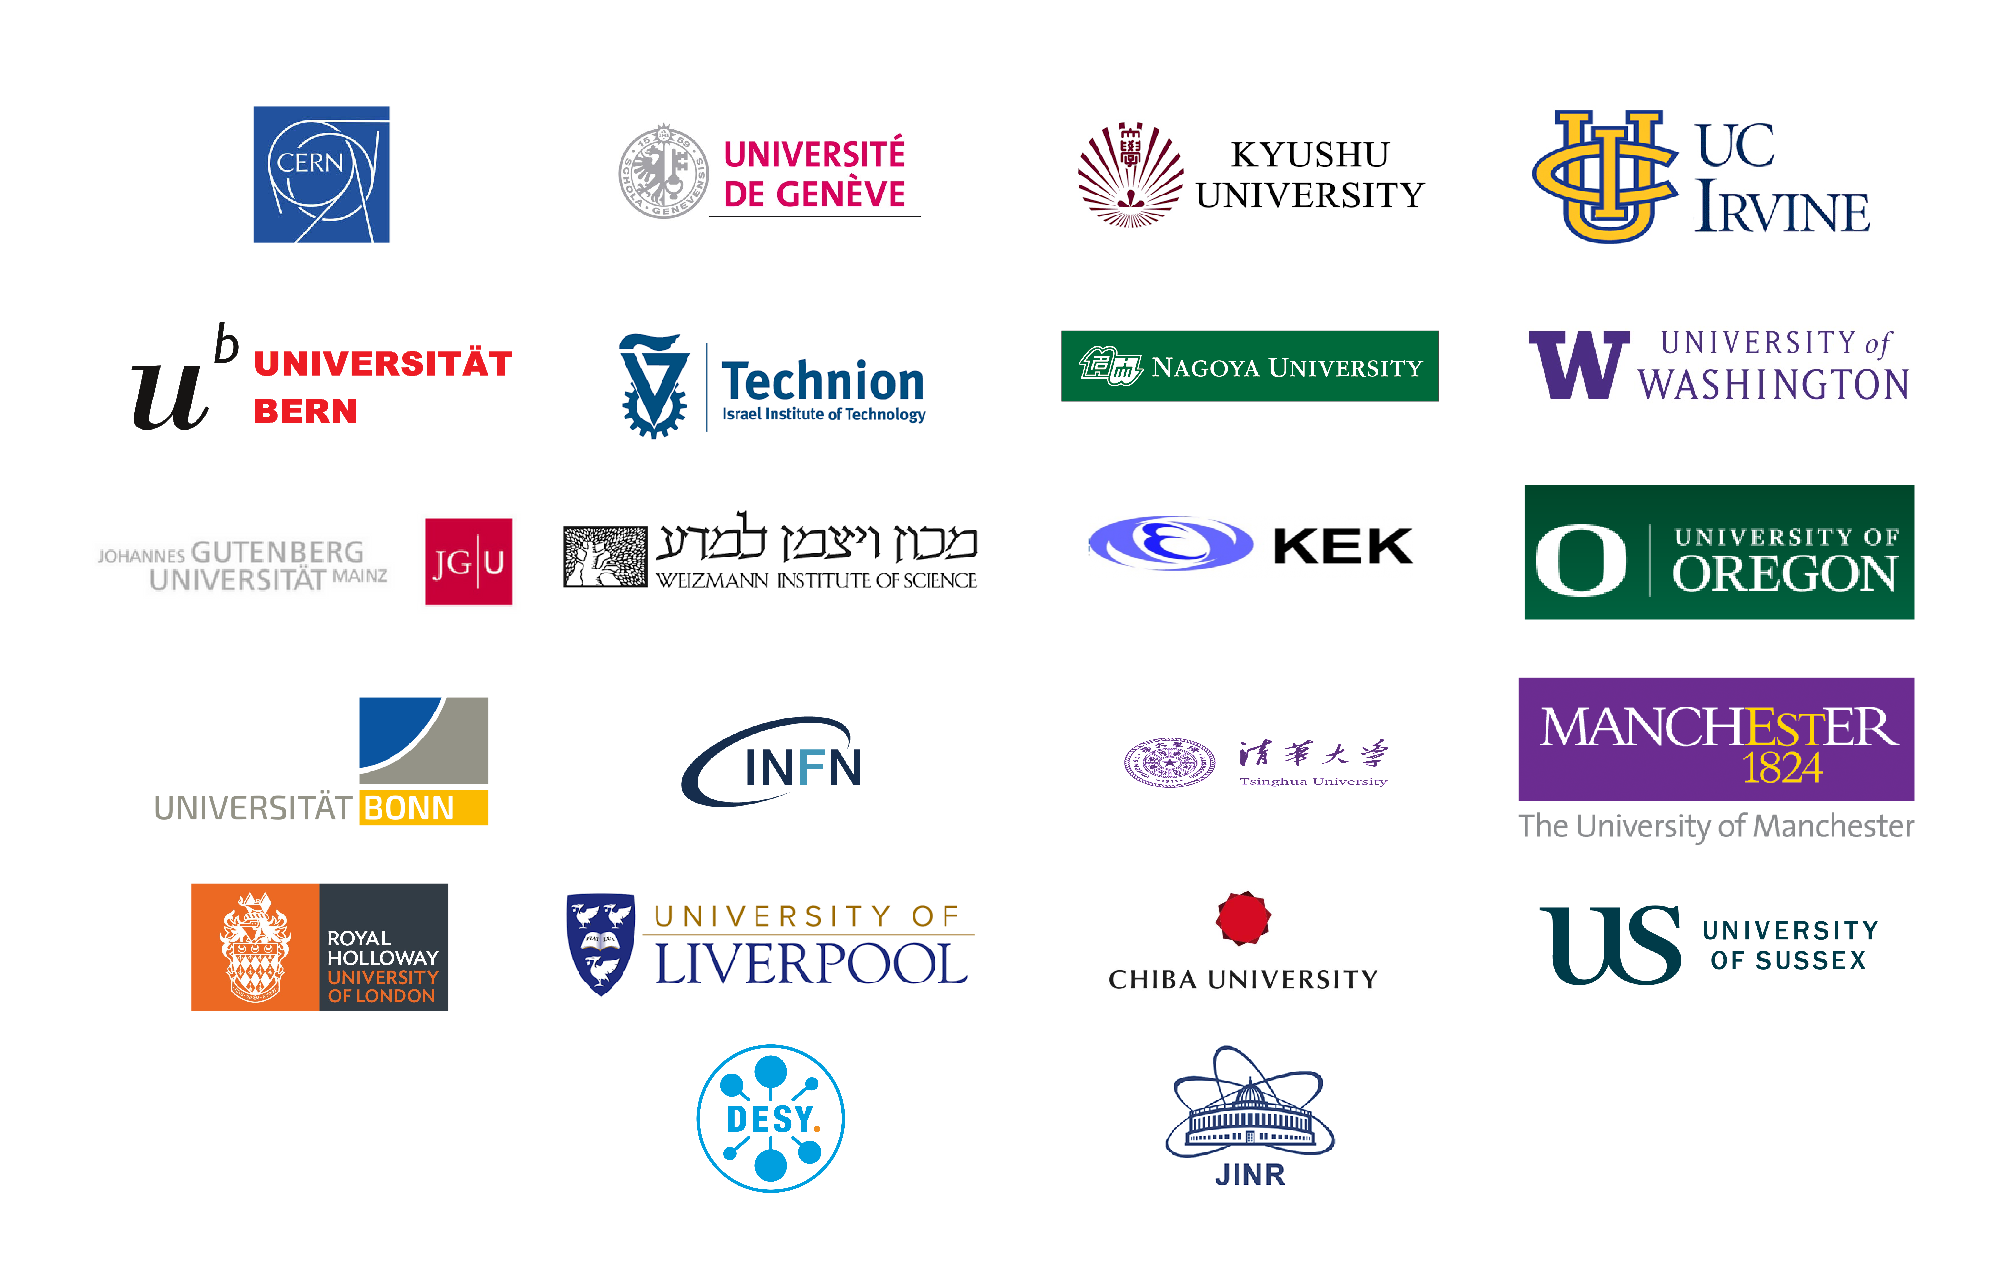 Logos of the collaborating institutions.